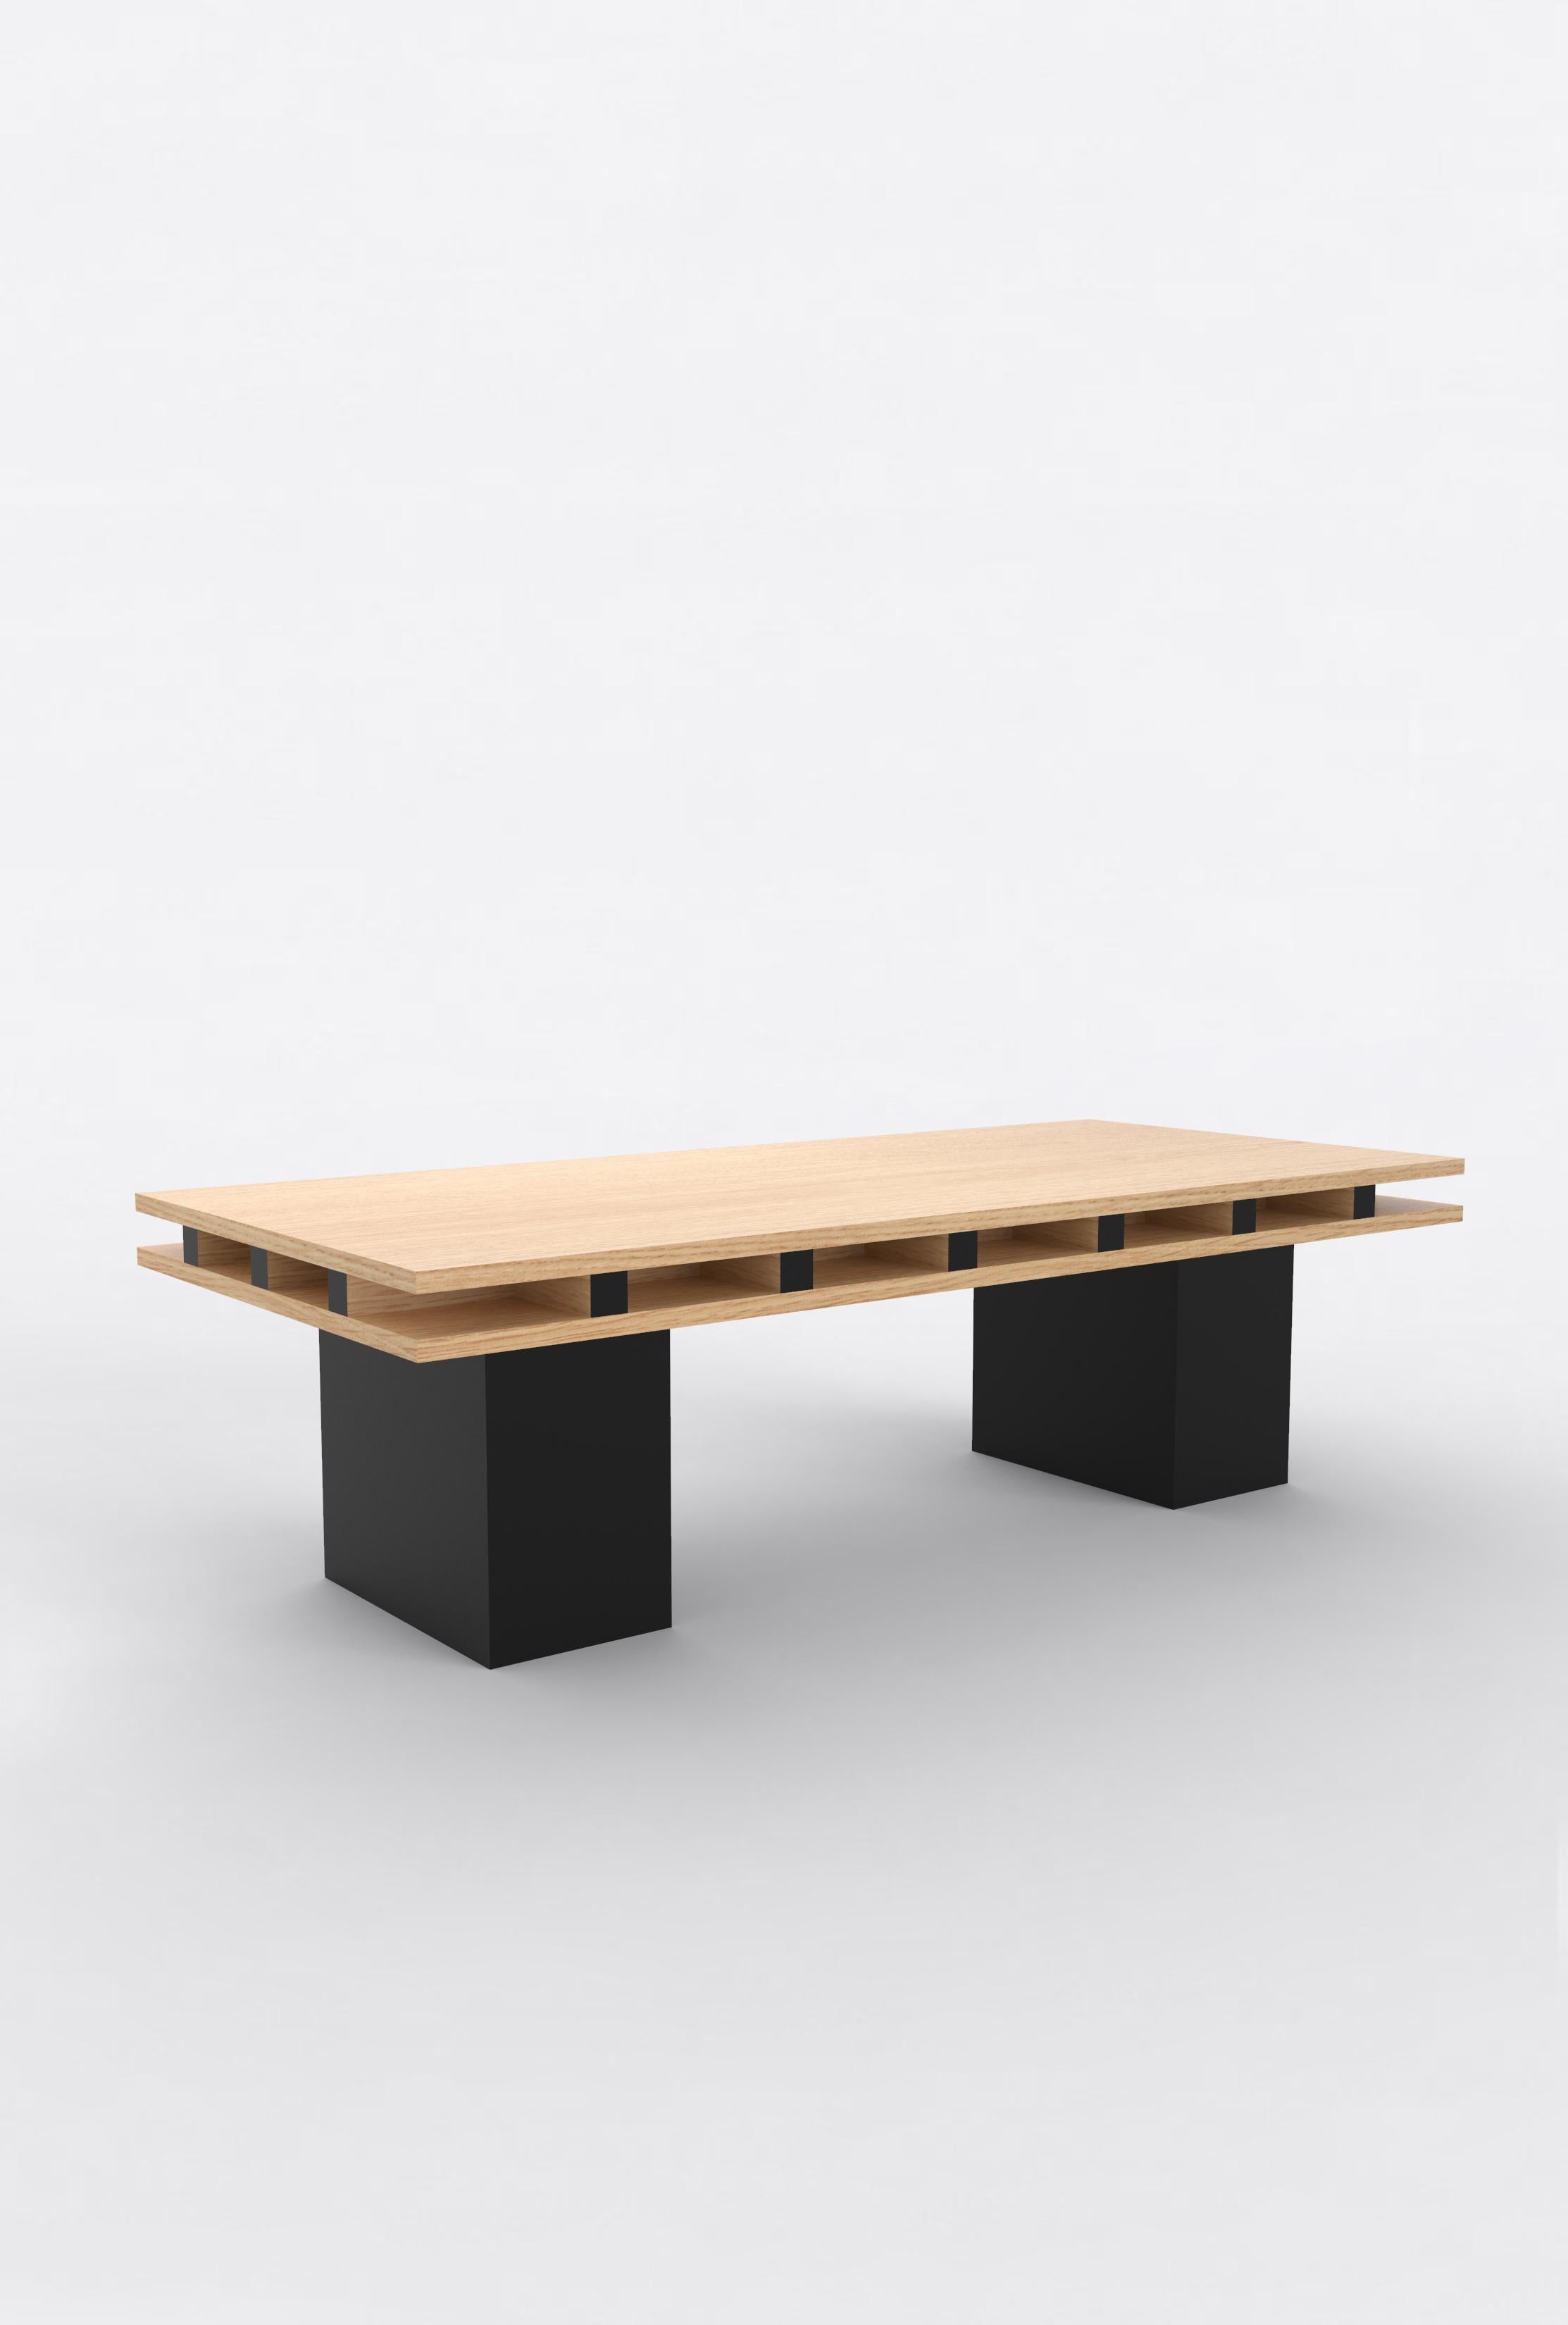 Orphan Work 101 Coffee Table
Shown in oak and black.
Available in natural oak with painted base.
Measures: 55” L x 25” D x 16” H

Orphan work is designed to complement in the heart of Soho, New York City. Each piece is handmade in New York and Los